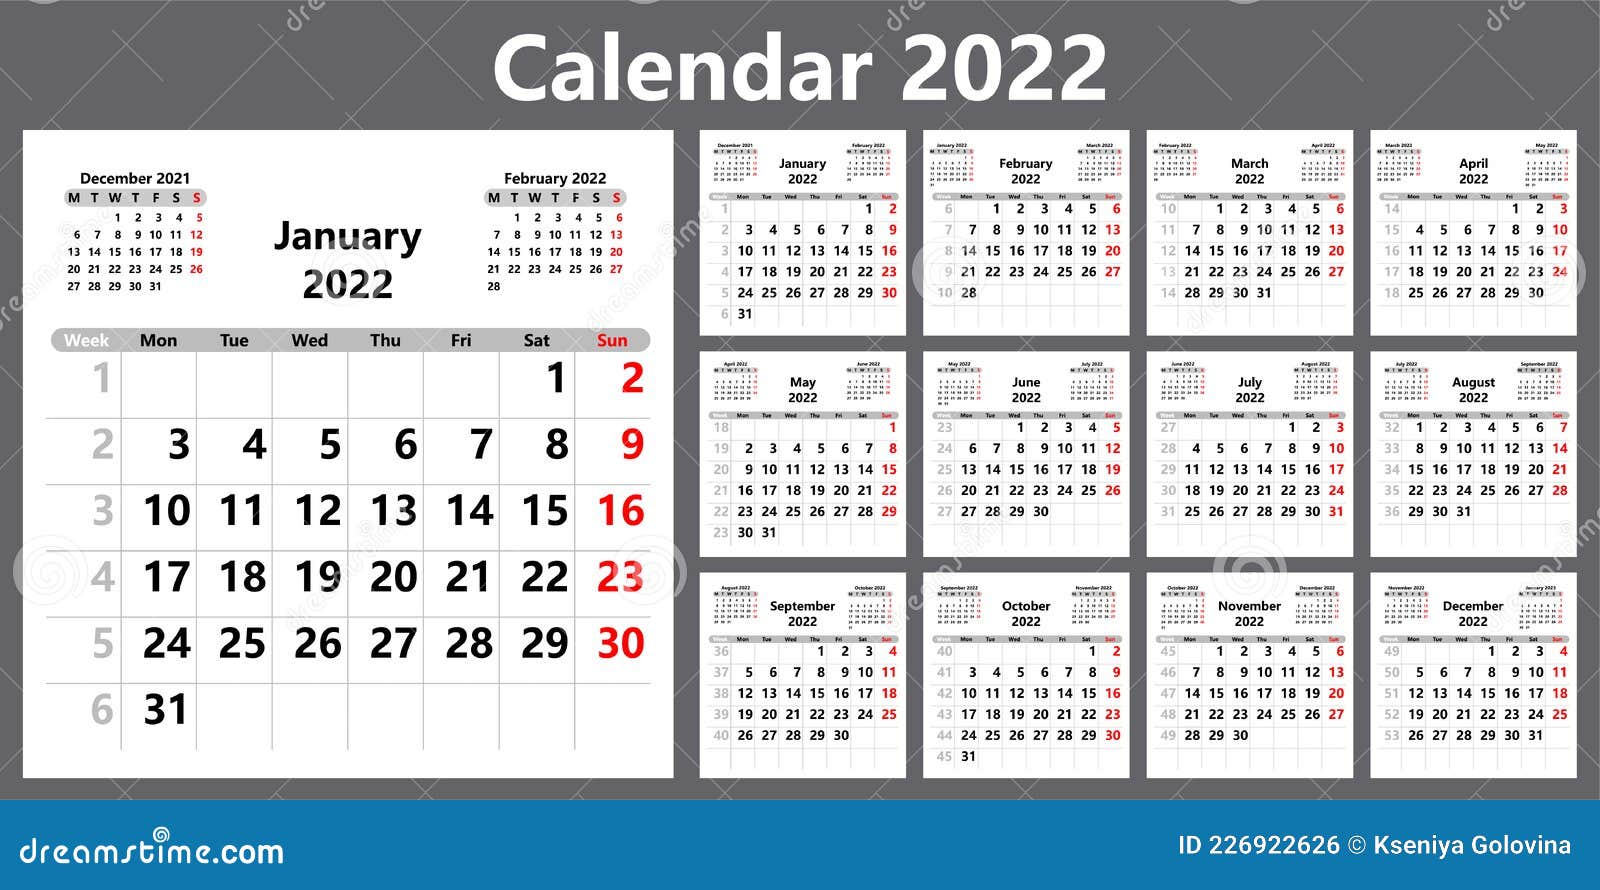 Planner Calendar For 2022 With Week Numbers Template For A Wall Calendar For A Company Stock Vector Illustration Of Number Month 226922626